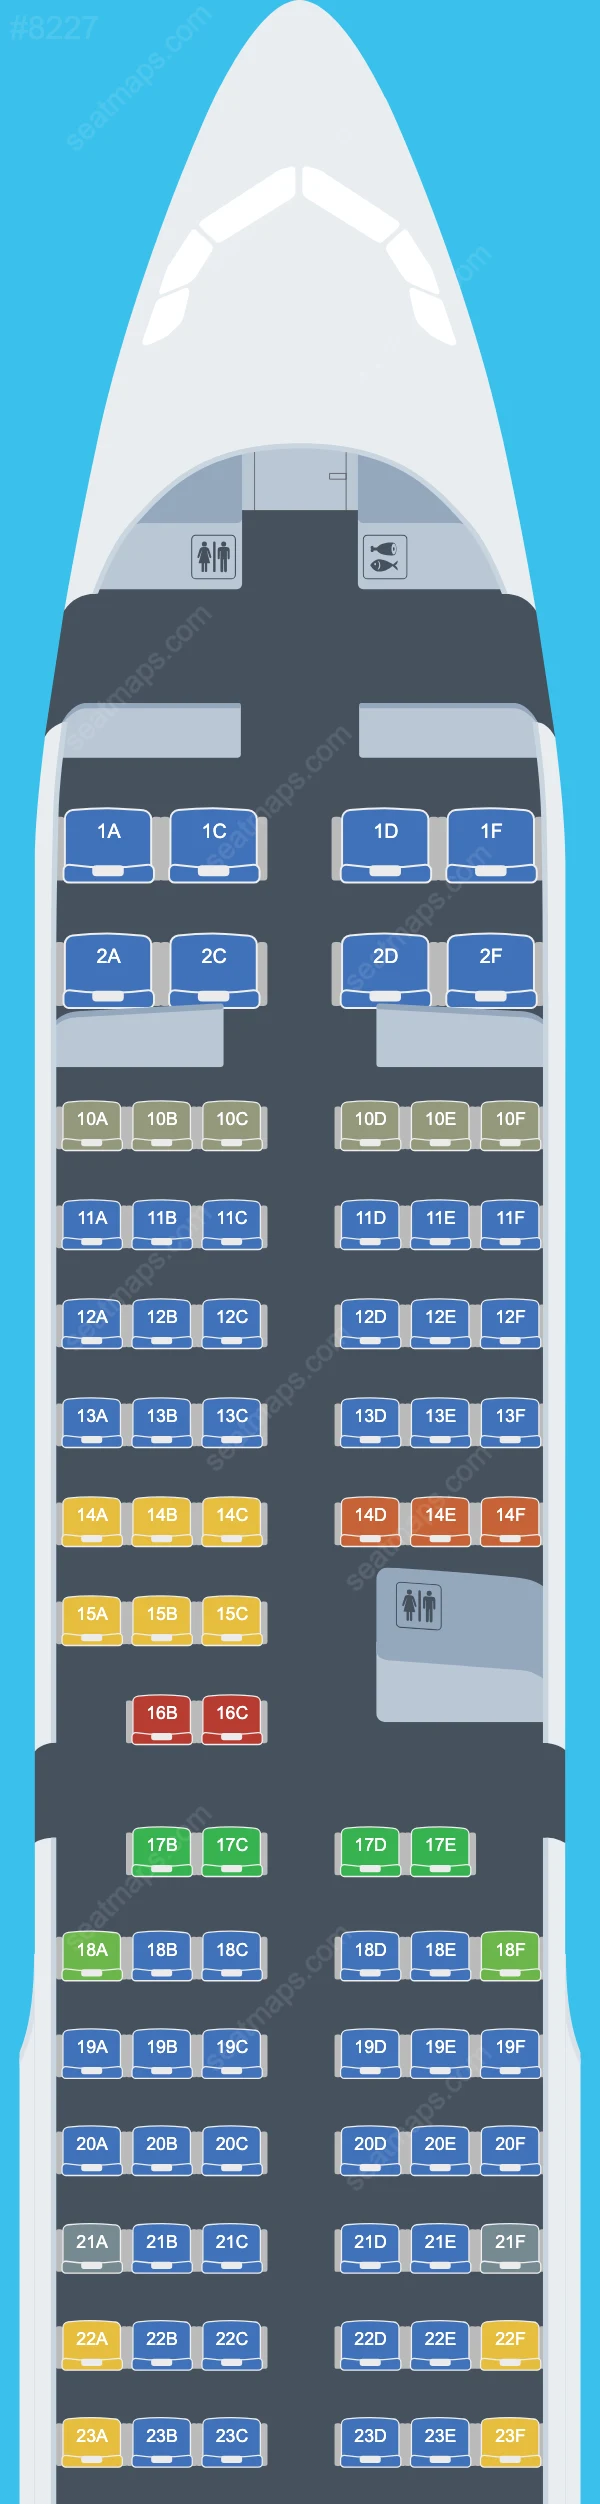 Nile Air Airbus A321-200 V.2 seatmap mobile preview